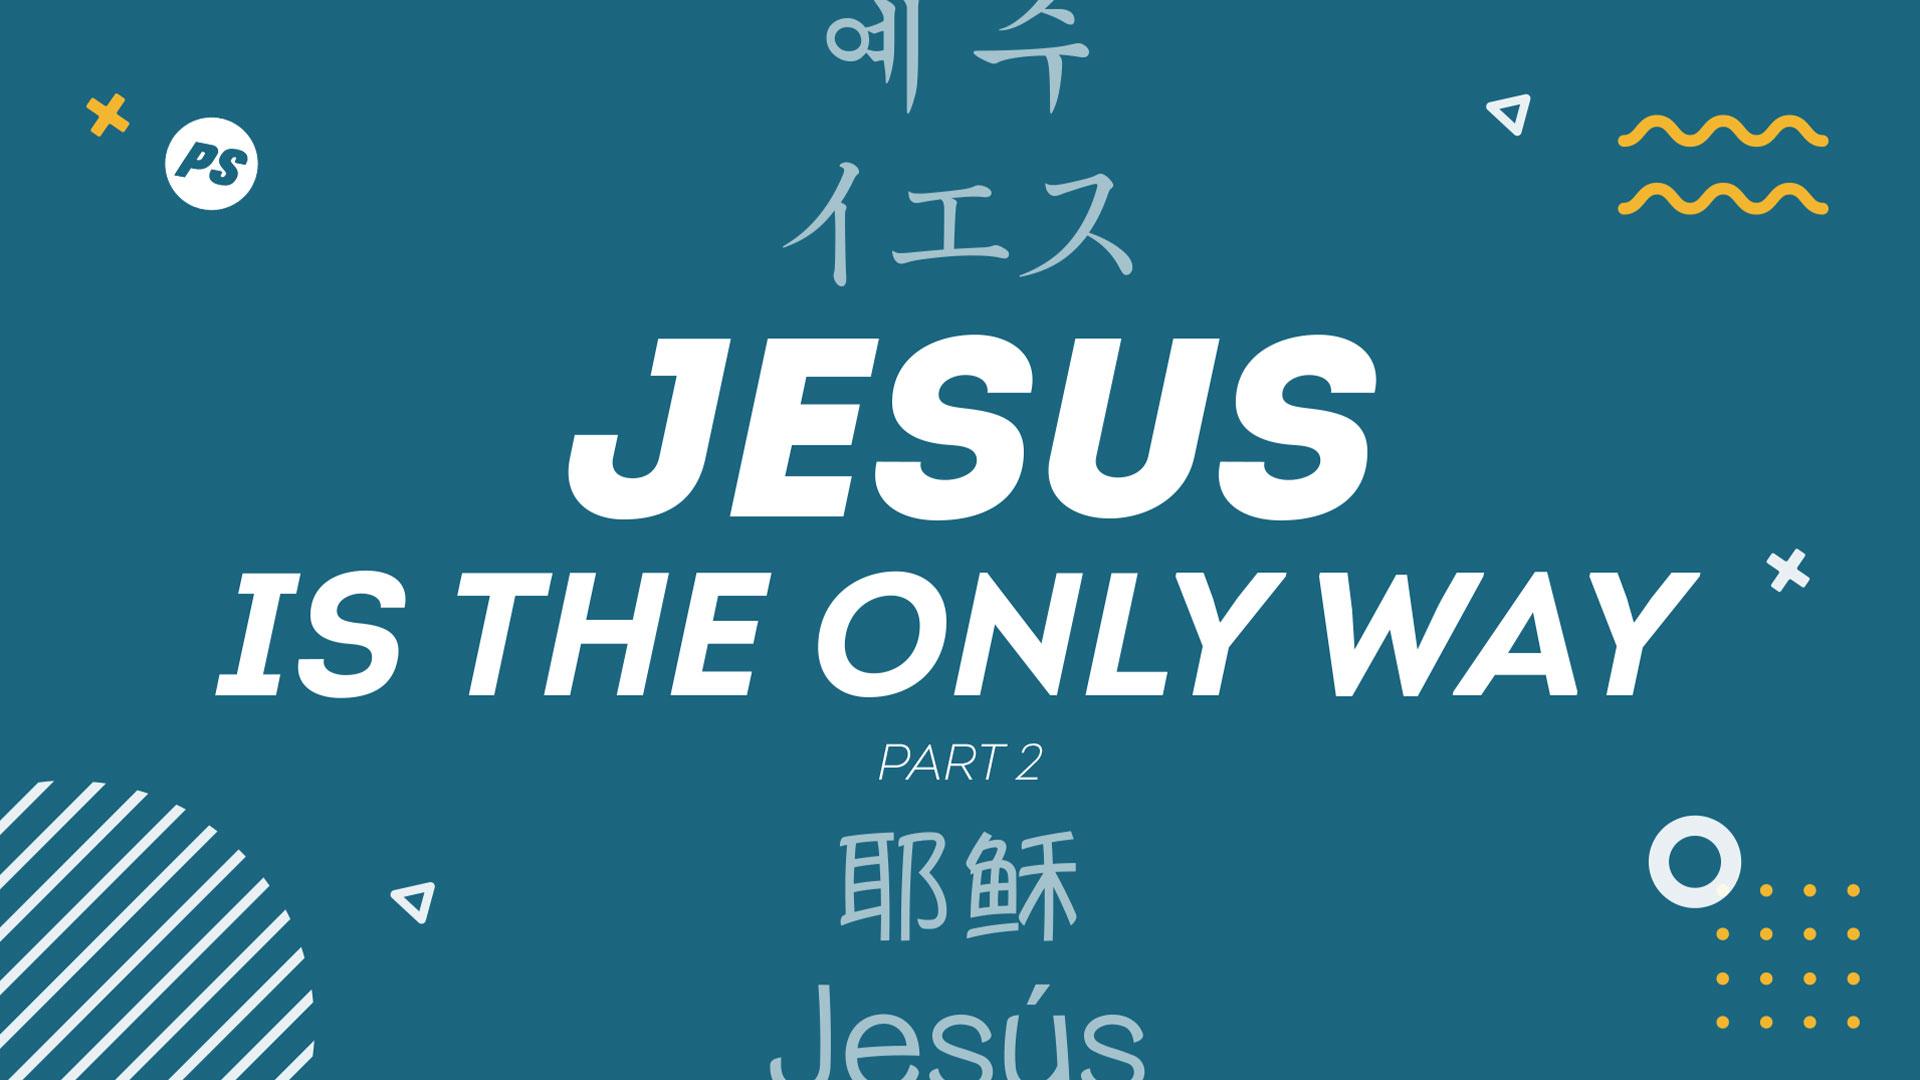 Featured Image for “Jesus is the Only Way (Part 2)”